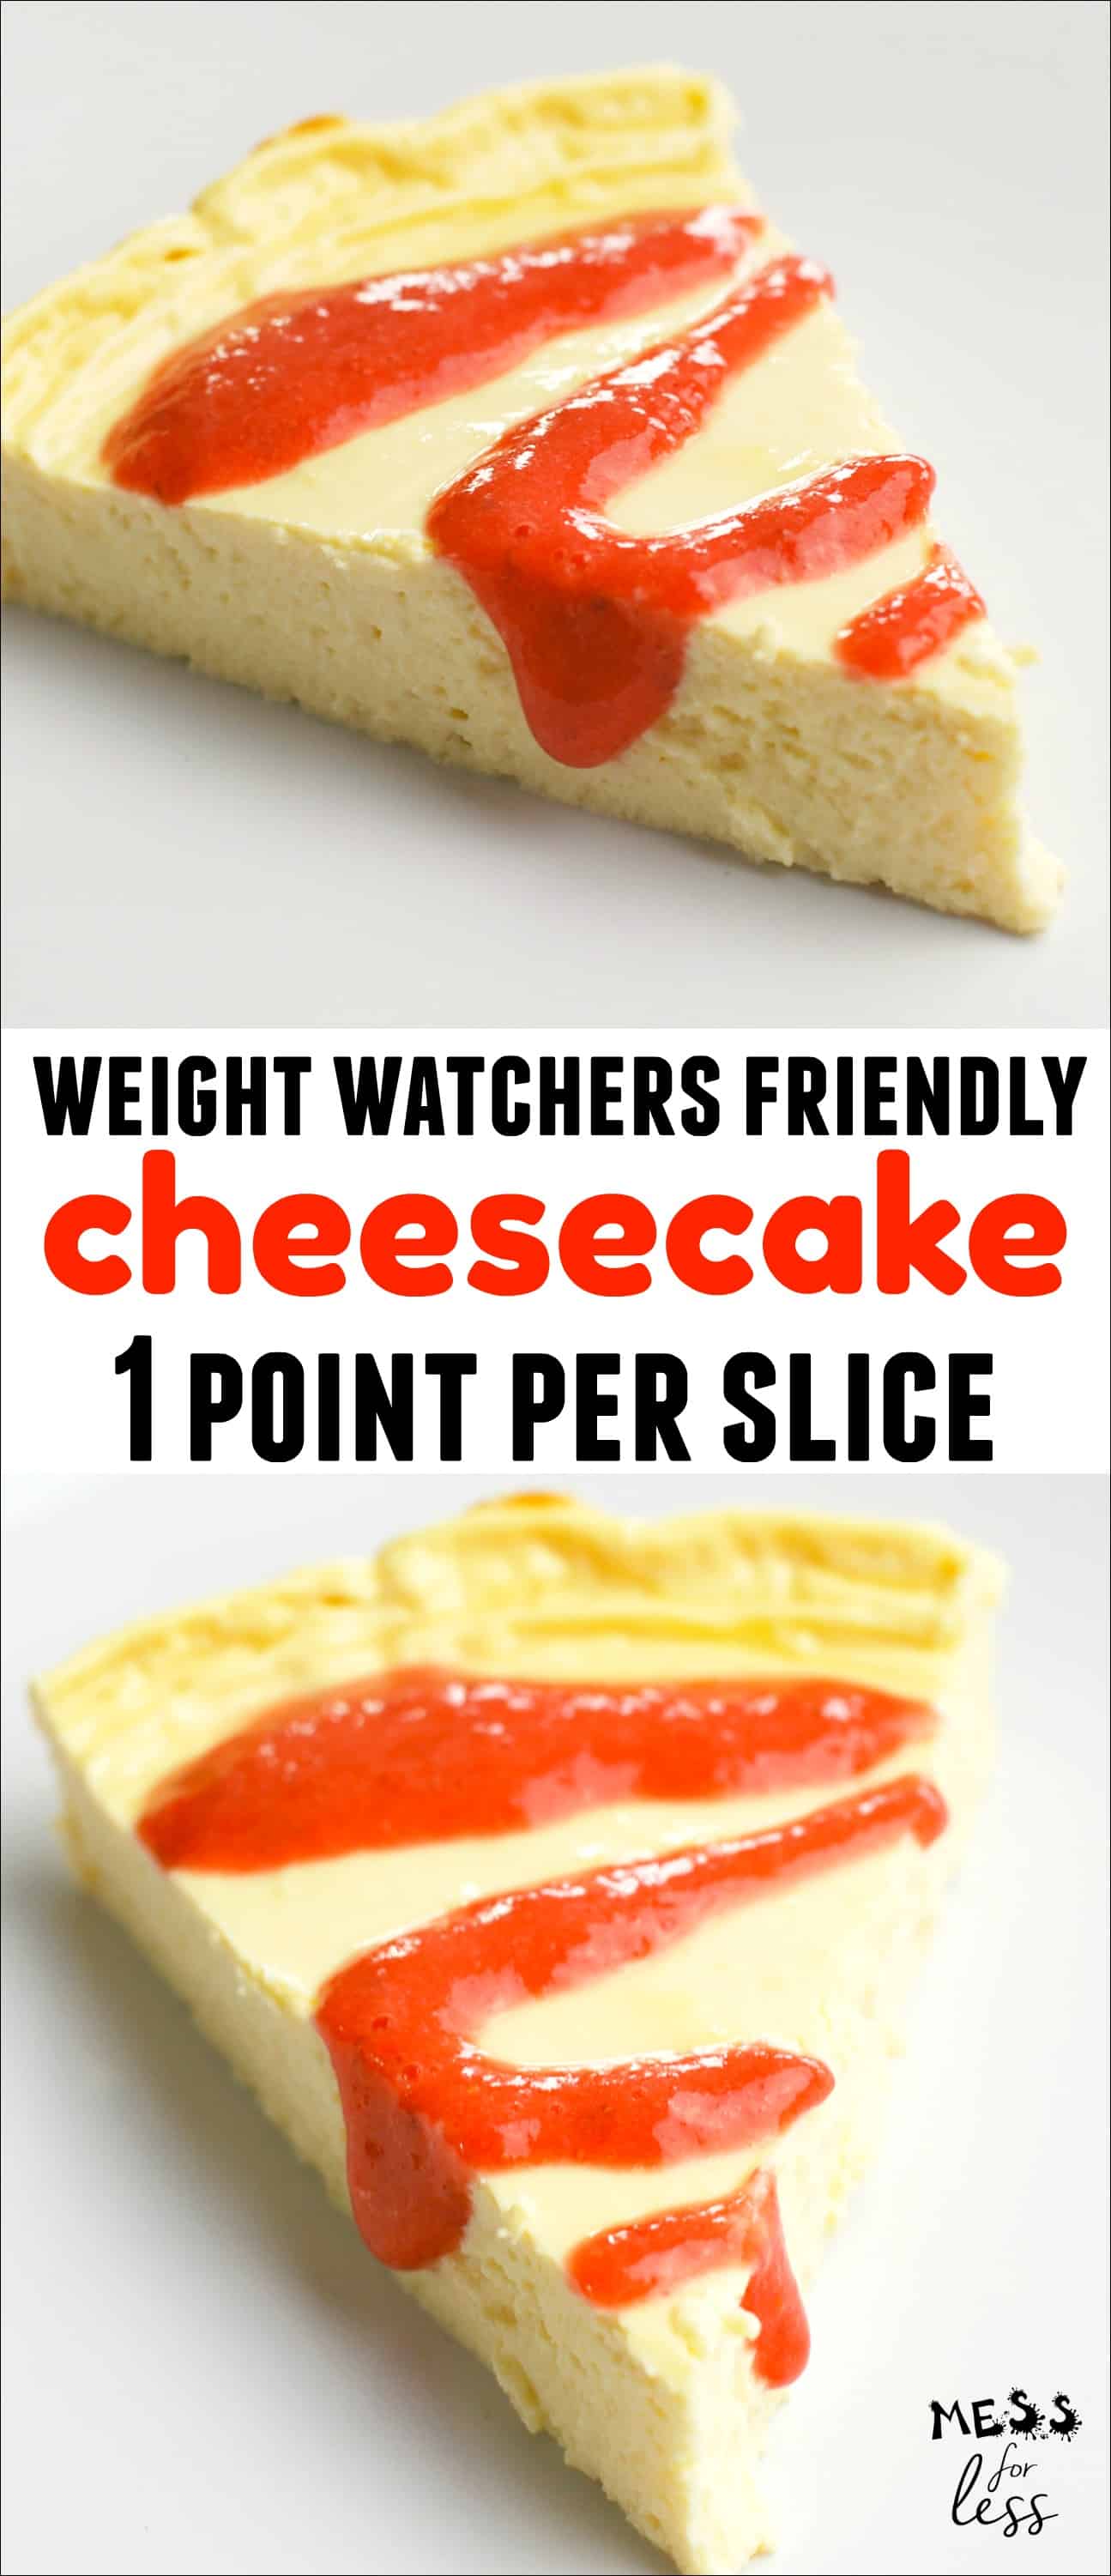 This One Point Cheesecake is delicious and creamy and just one point per slice. Only 4 points for the entire cake on the Weight Watchers Freestyle plan.